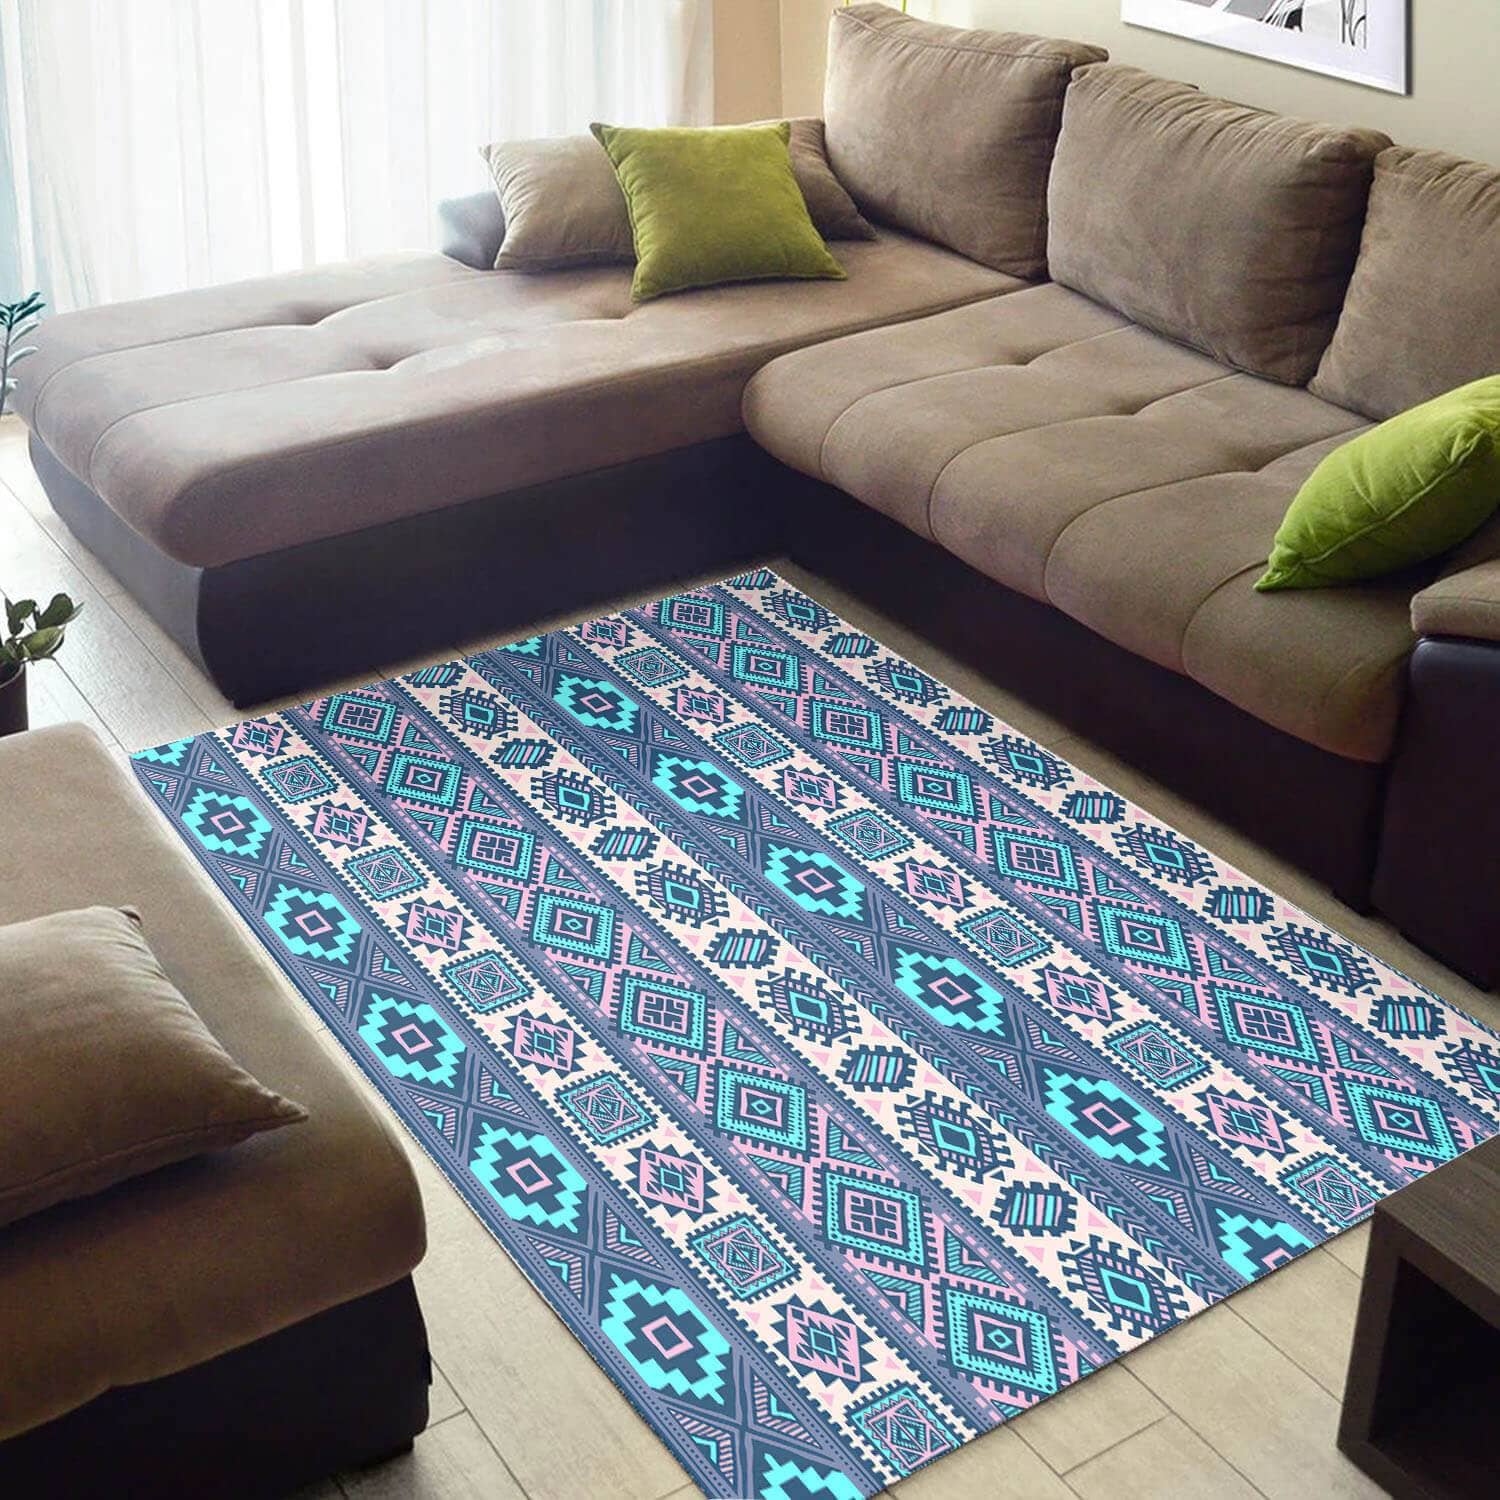 Nice African Attractive Inspired Seamless Pattern Style Carpet Living Room Rug